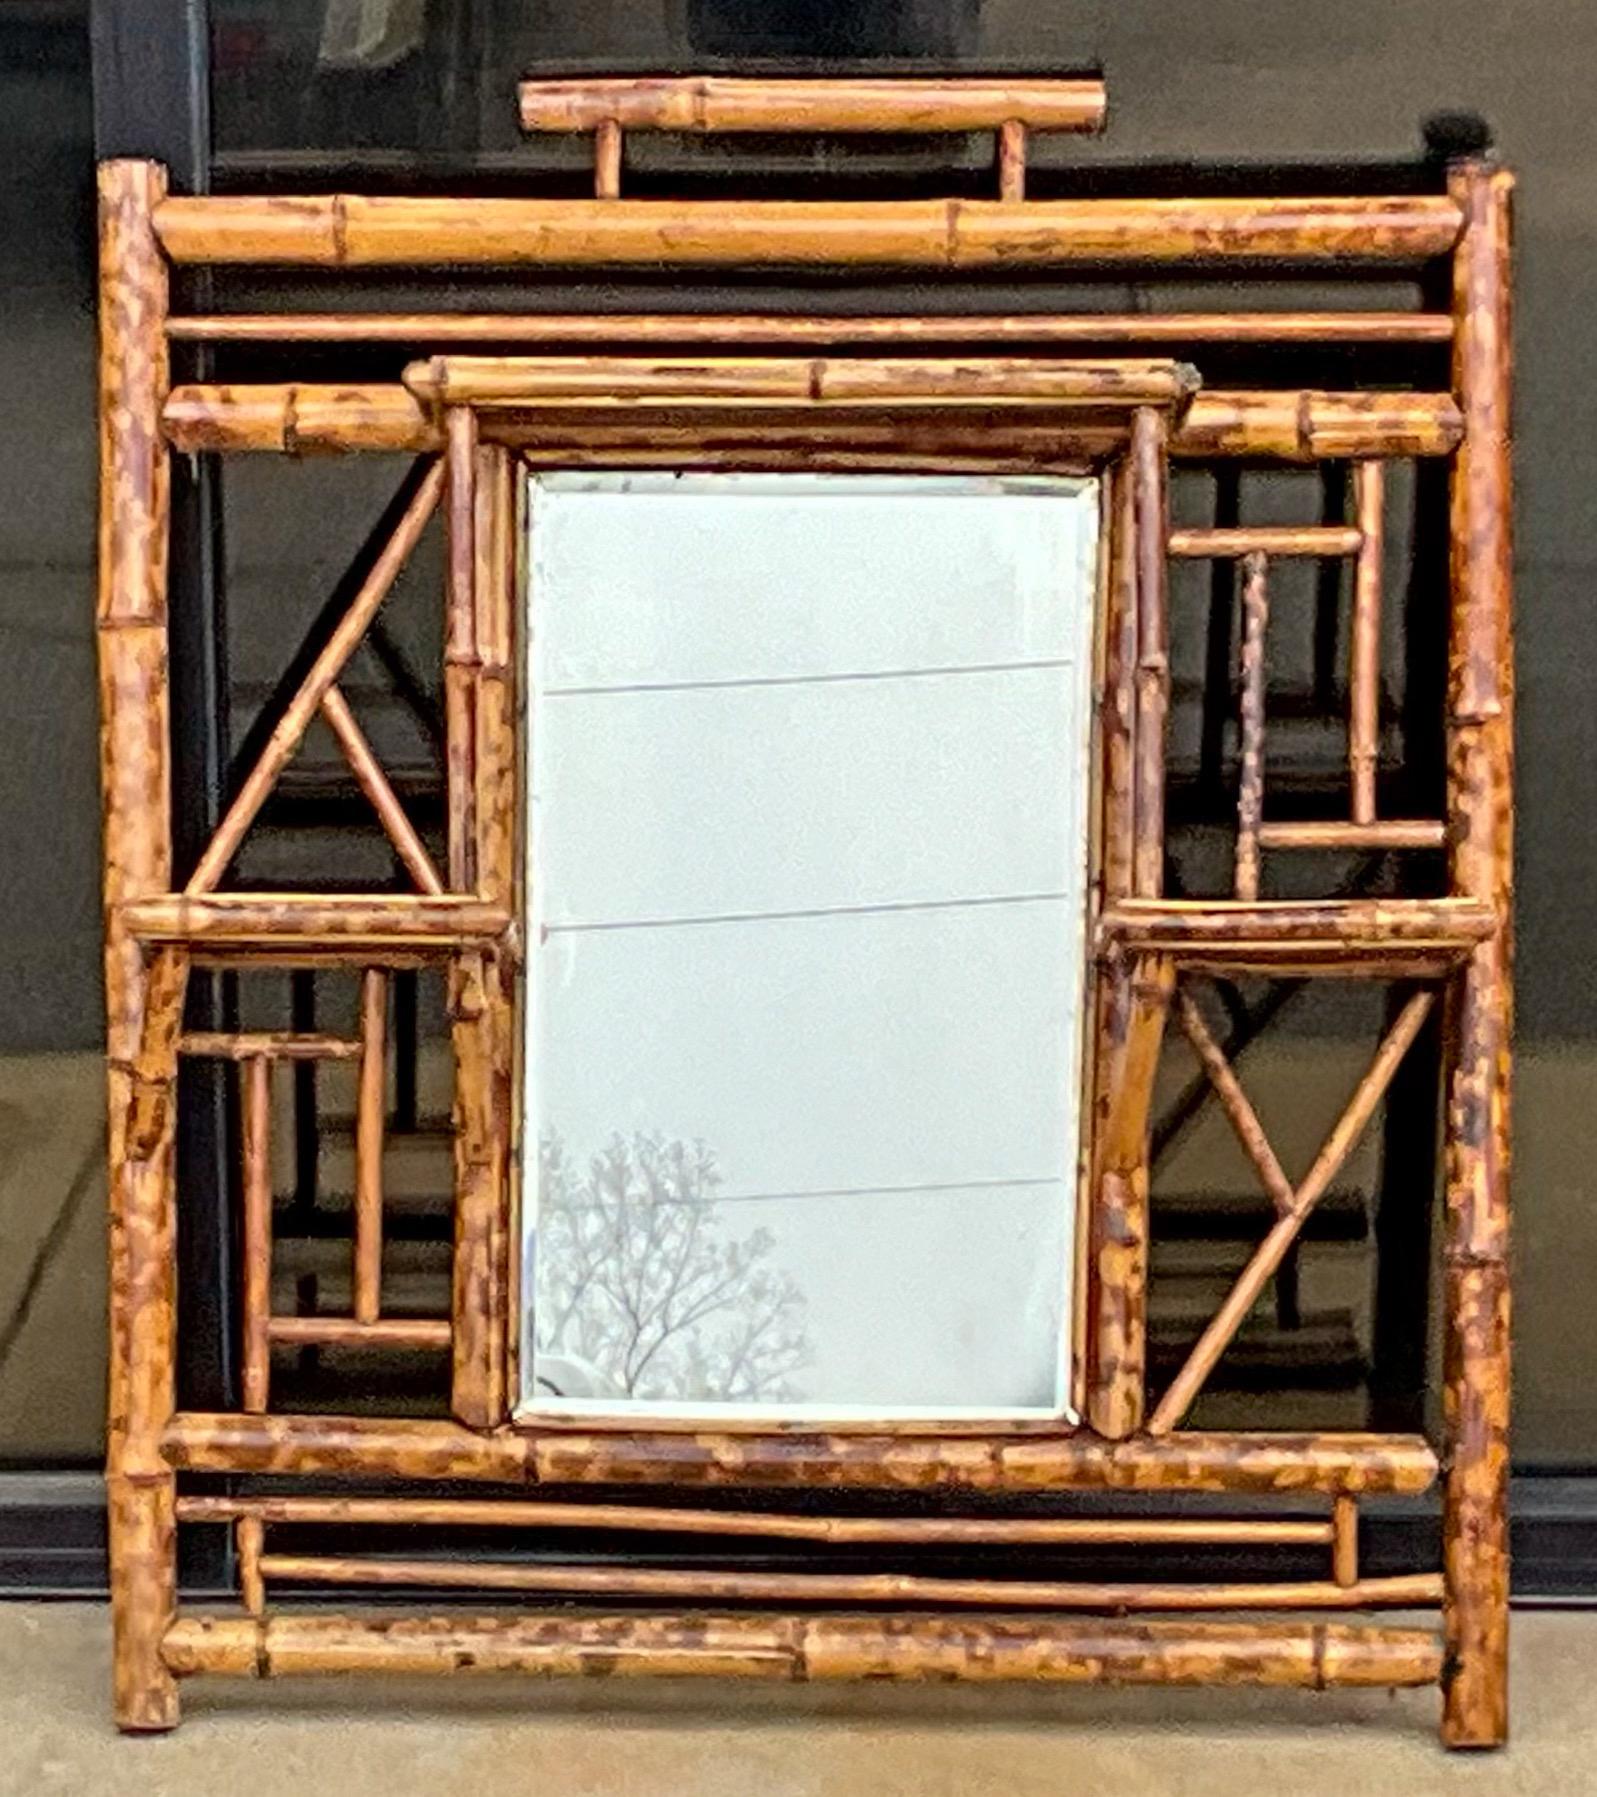 19th-C. English Aesthetic Movement Bamboo & Lacquer Wall Shelf W/ Mirror In Good Condition For Sale In Kennesaw, GA